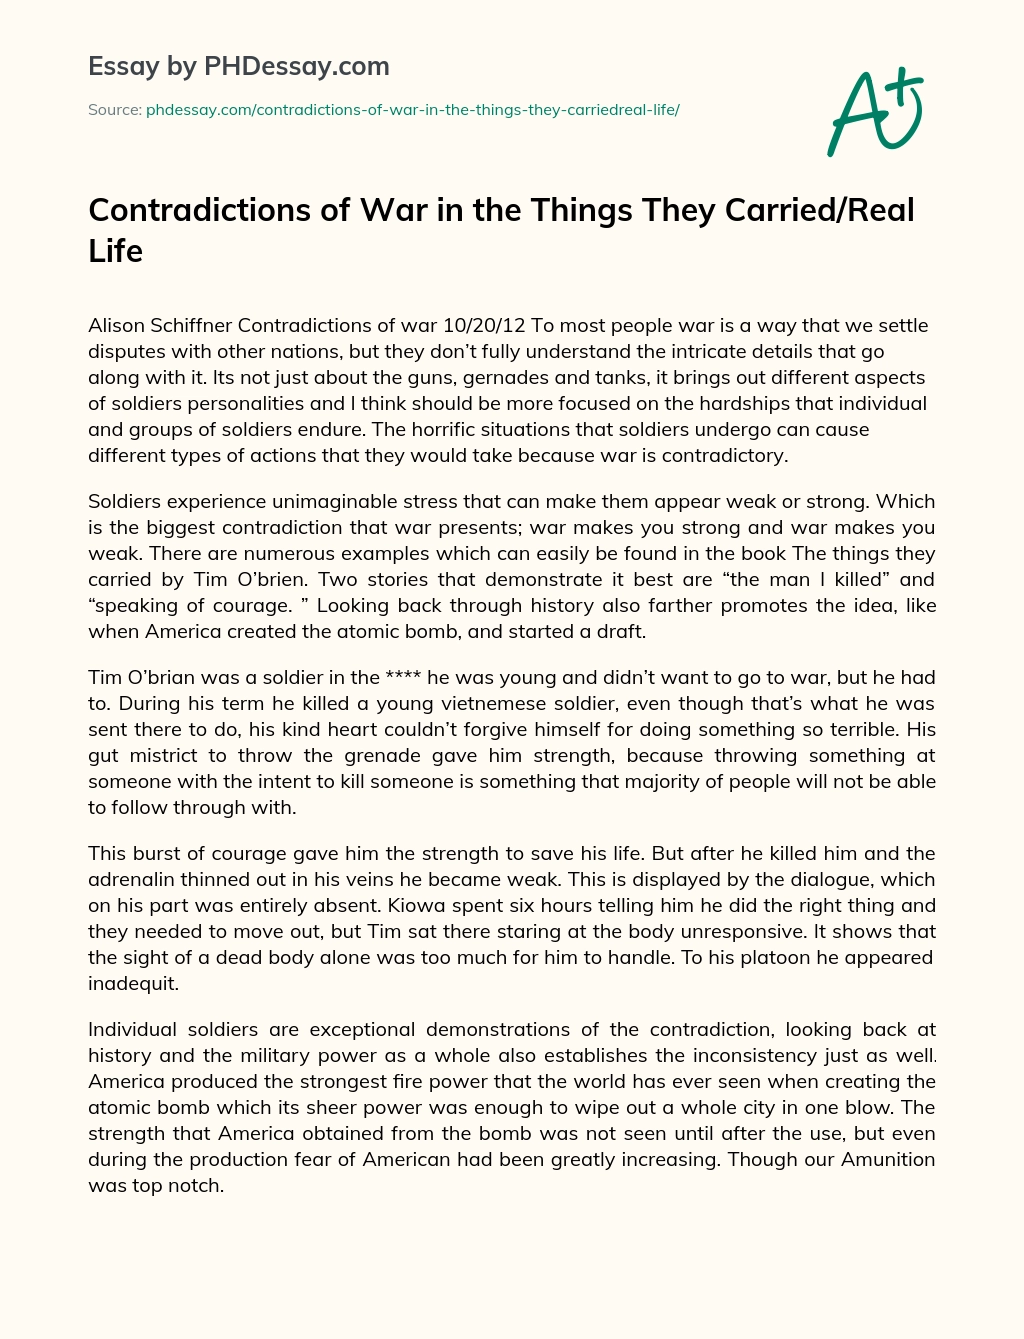 Contradictions of War in the Things They Carried/Real Life essay